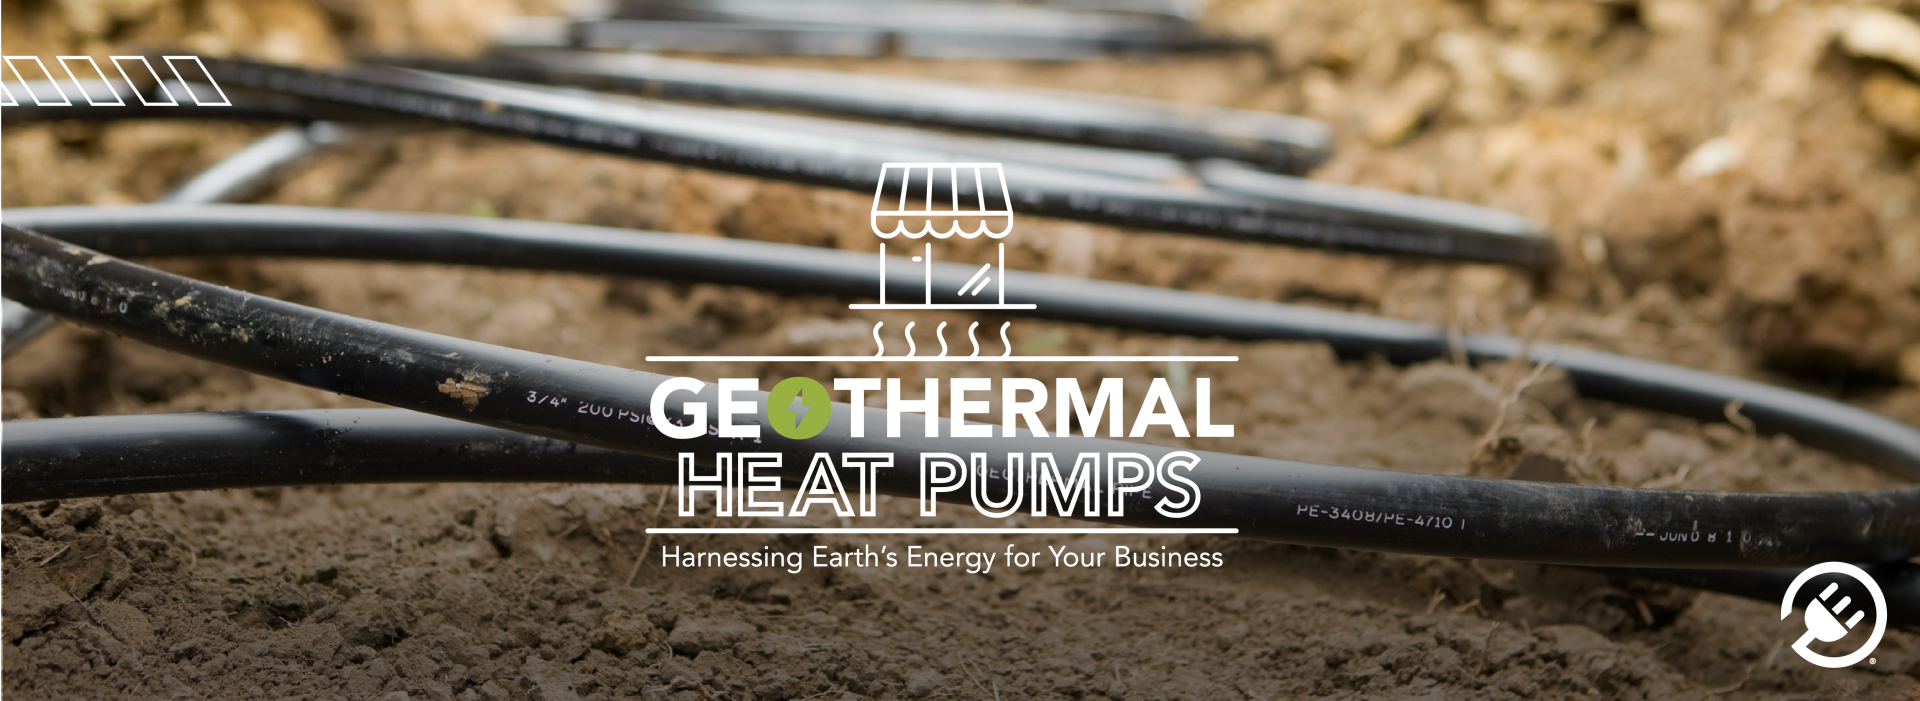 Geothermal Heat Pumps: Harnessing Earth's Energy for Your Business 